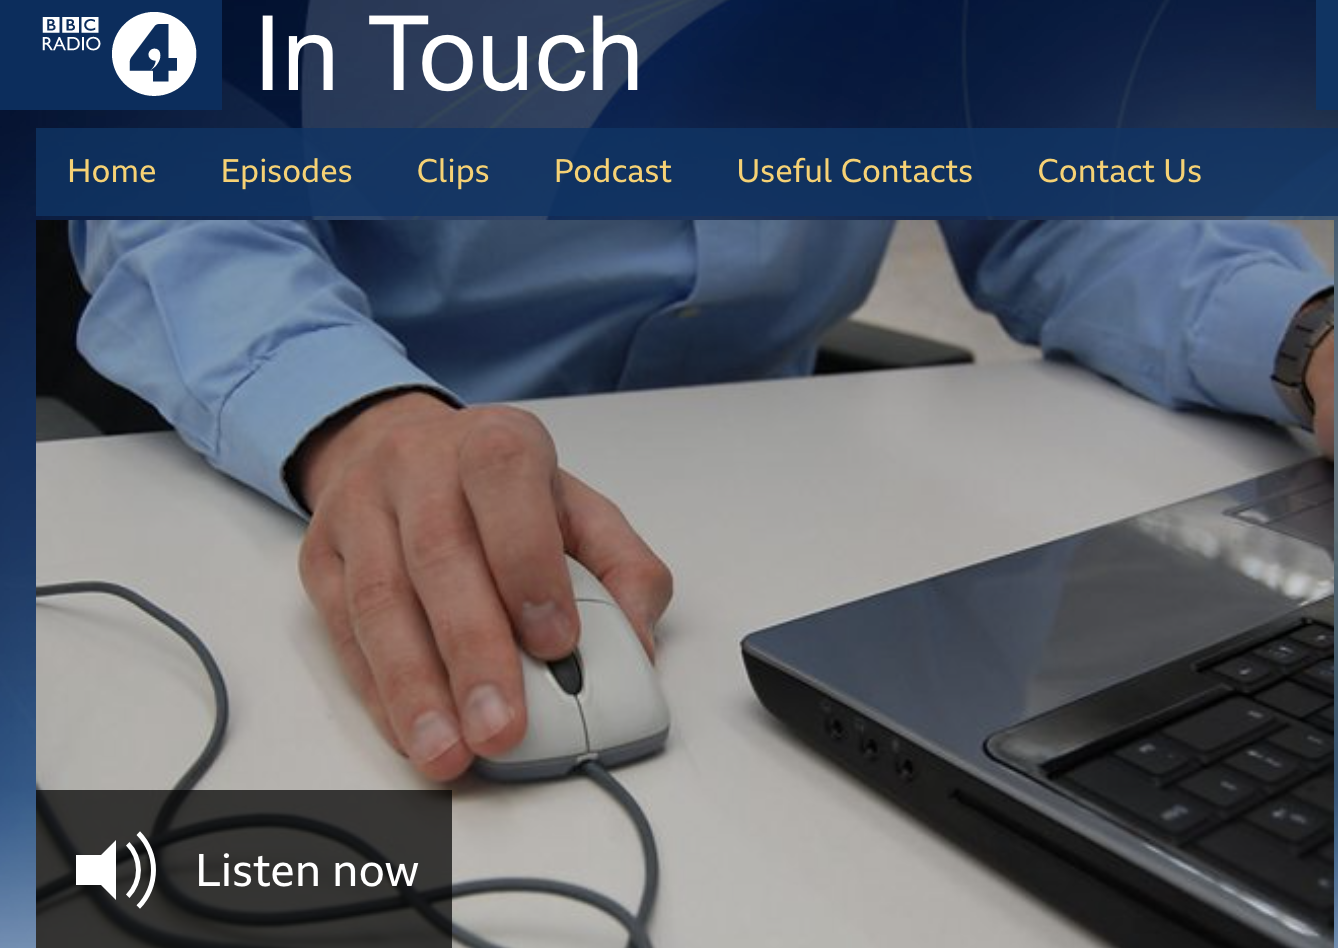 Screenshot of webpage showing the In Touch website area, with man operating mouse and computer on desk